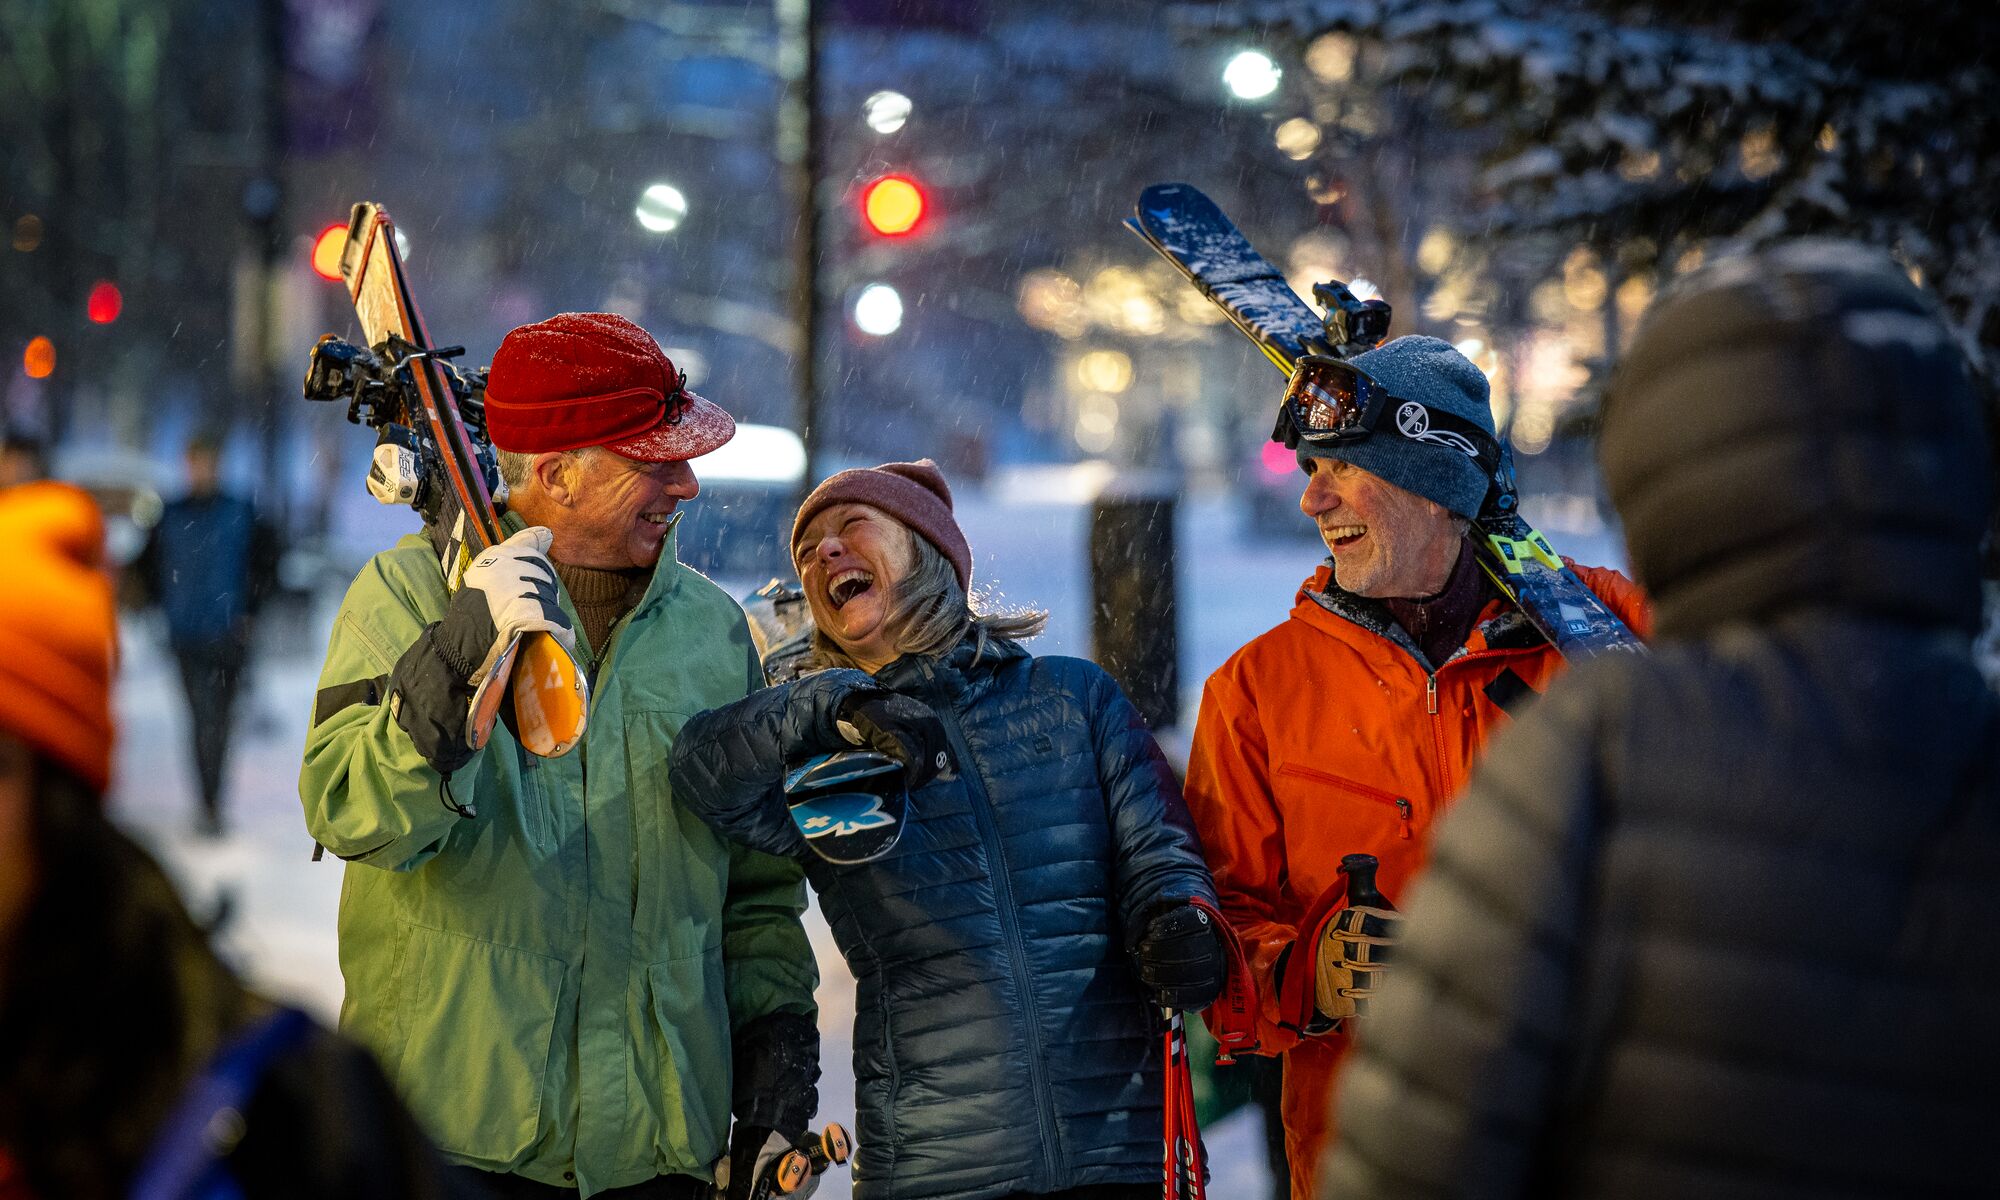 Three friends walk through the Banff Town with their skis on a snowy winter day in Banff National Park